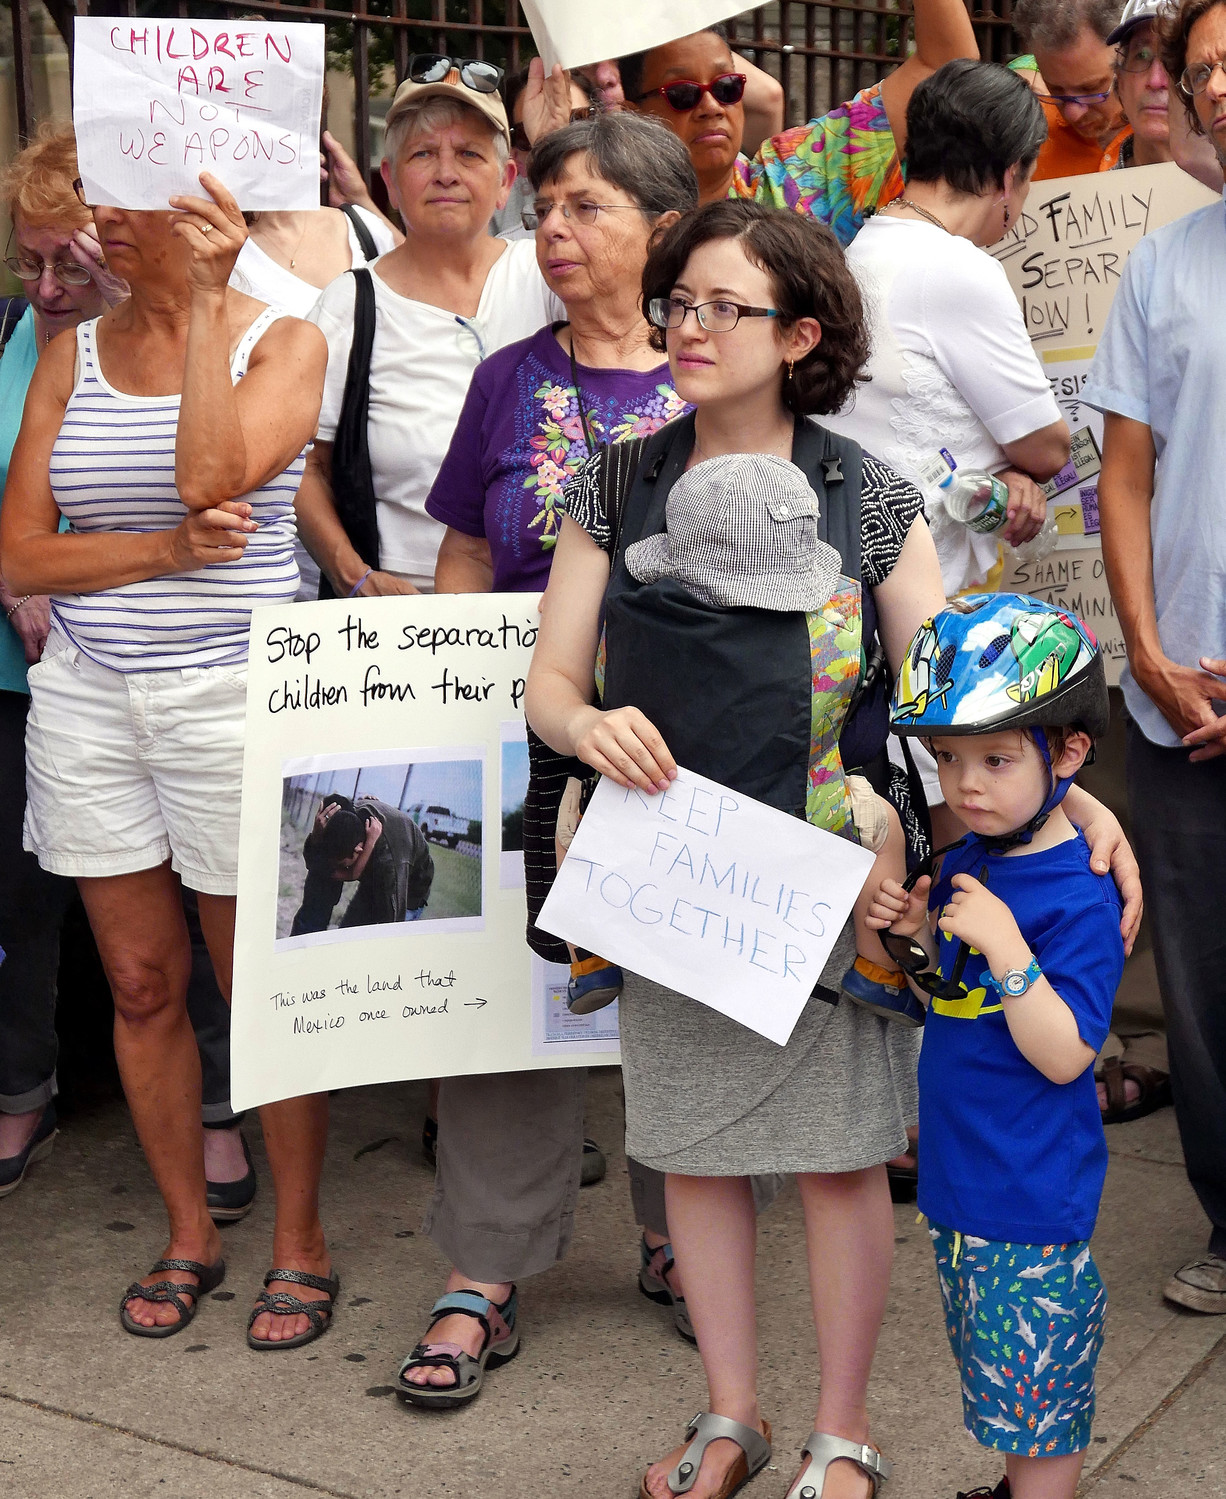 Arielle Rubenstern and her children, Raphael, 4, and Elijah, 1, participated in a vigil in the Bronx June 18 calling for an end to the separation of children from their parents at the U.S. border with Mexico. The event was co-sponsored by the Sisters of Charity of New York and North Bronx Racial Justice. “As women religious, as Christians, it is our moral duty to speak for the children who are being separated from their parents. This policy is devastating and dangerous on countless levels and it must end,” said Sister Jane Iannucelli, S.C., president of the Sisters of Charity.